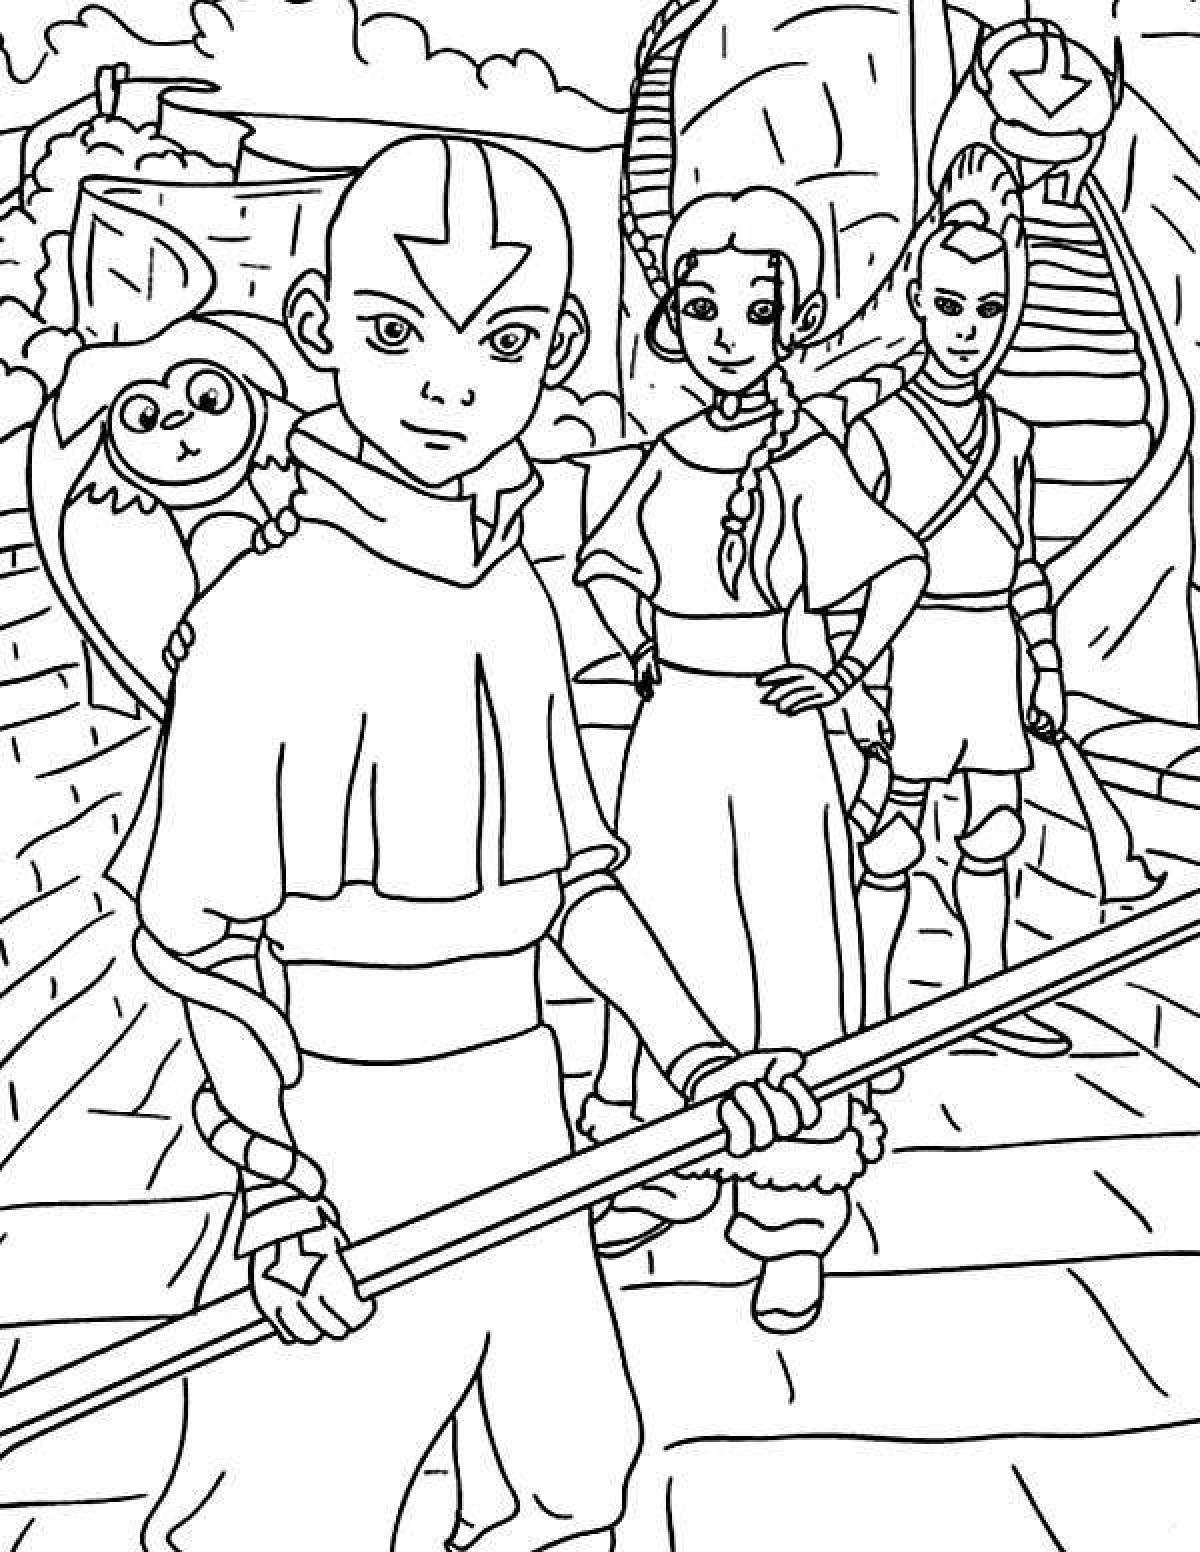 Aang's glowing avatar coloring page